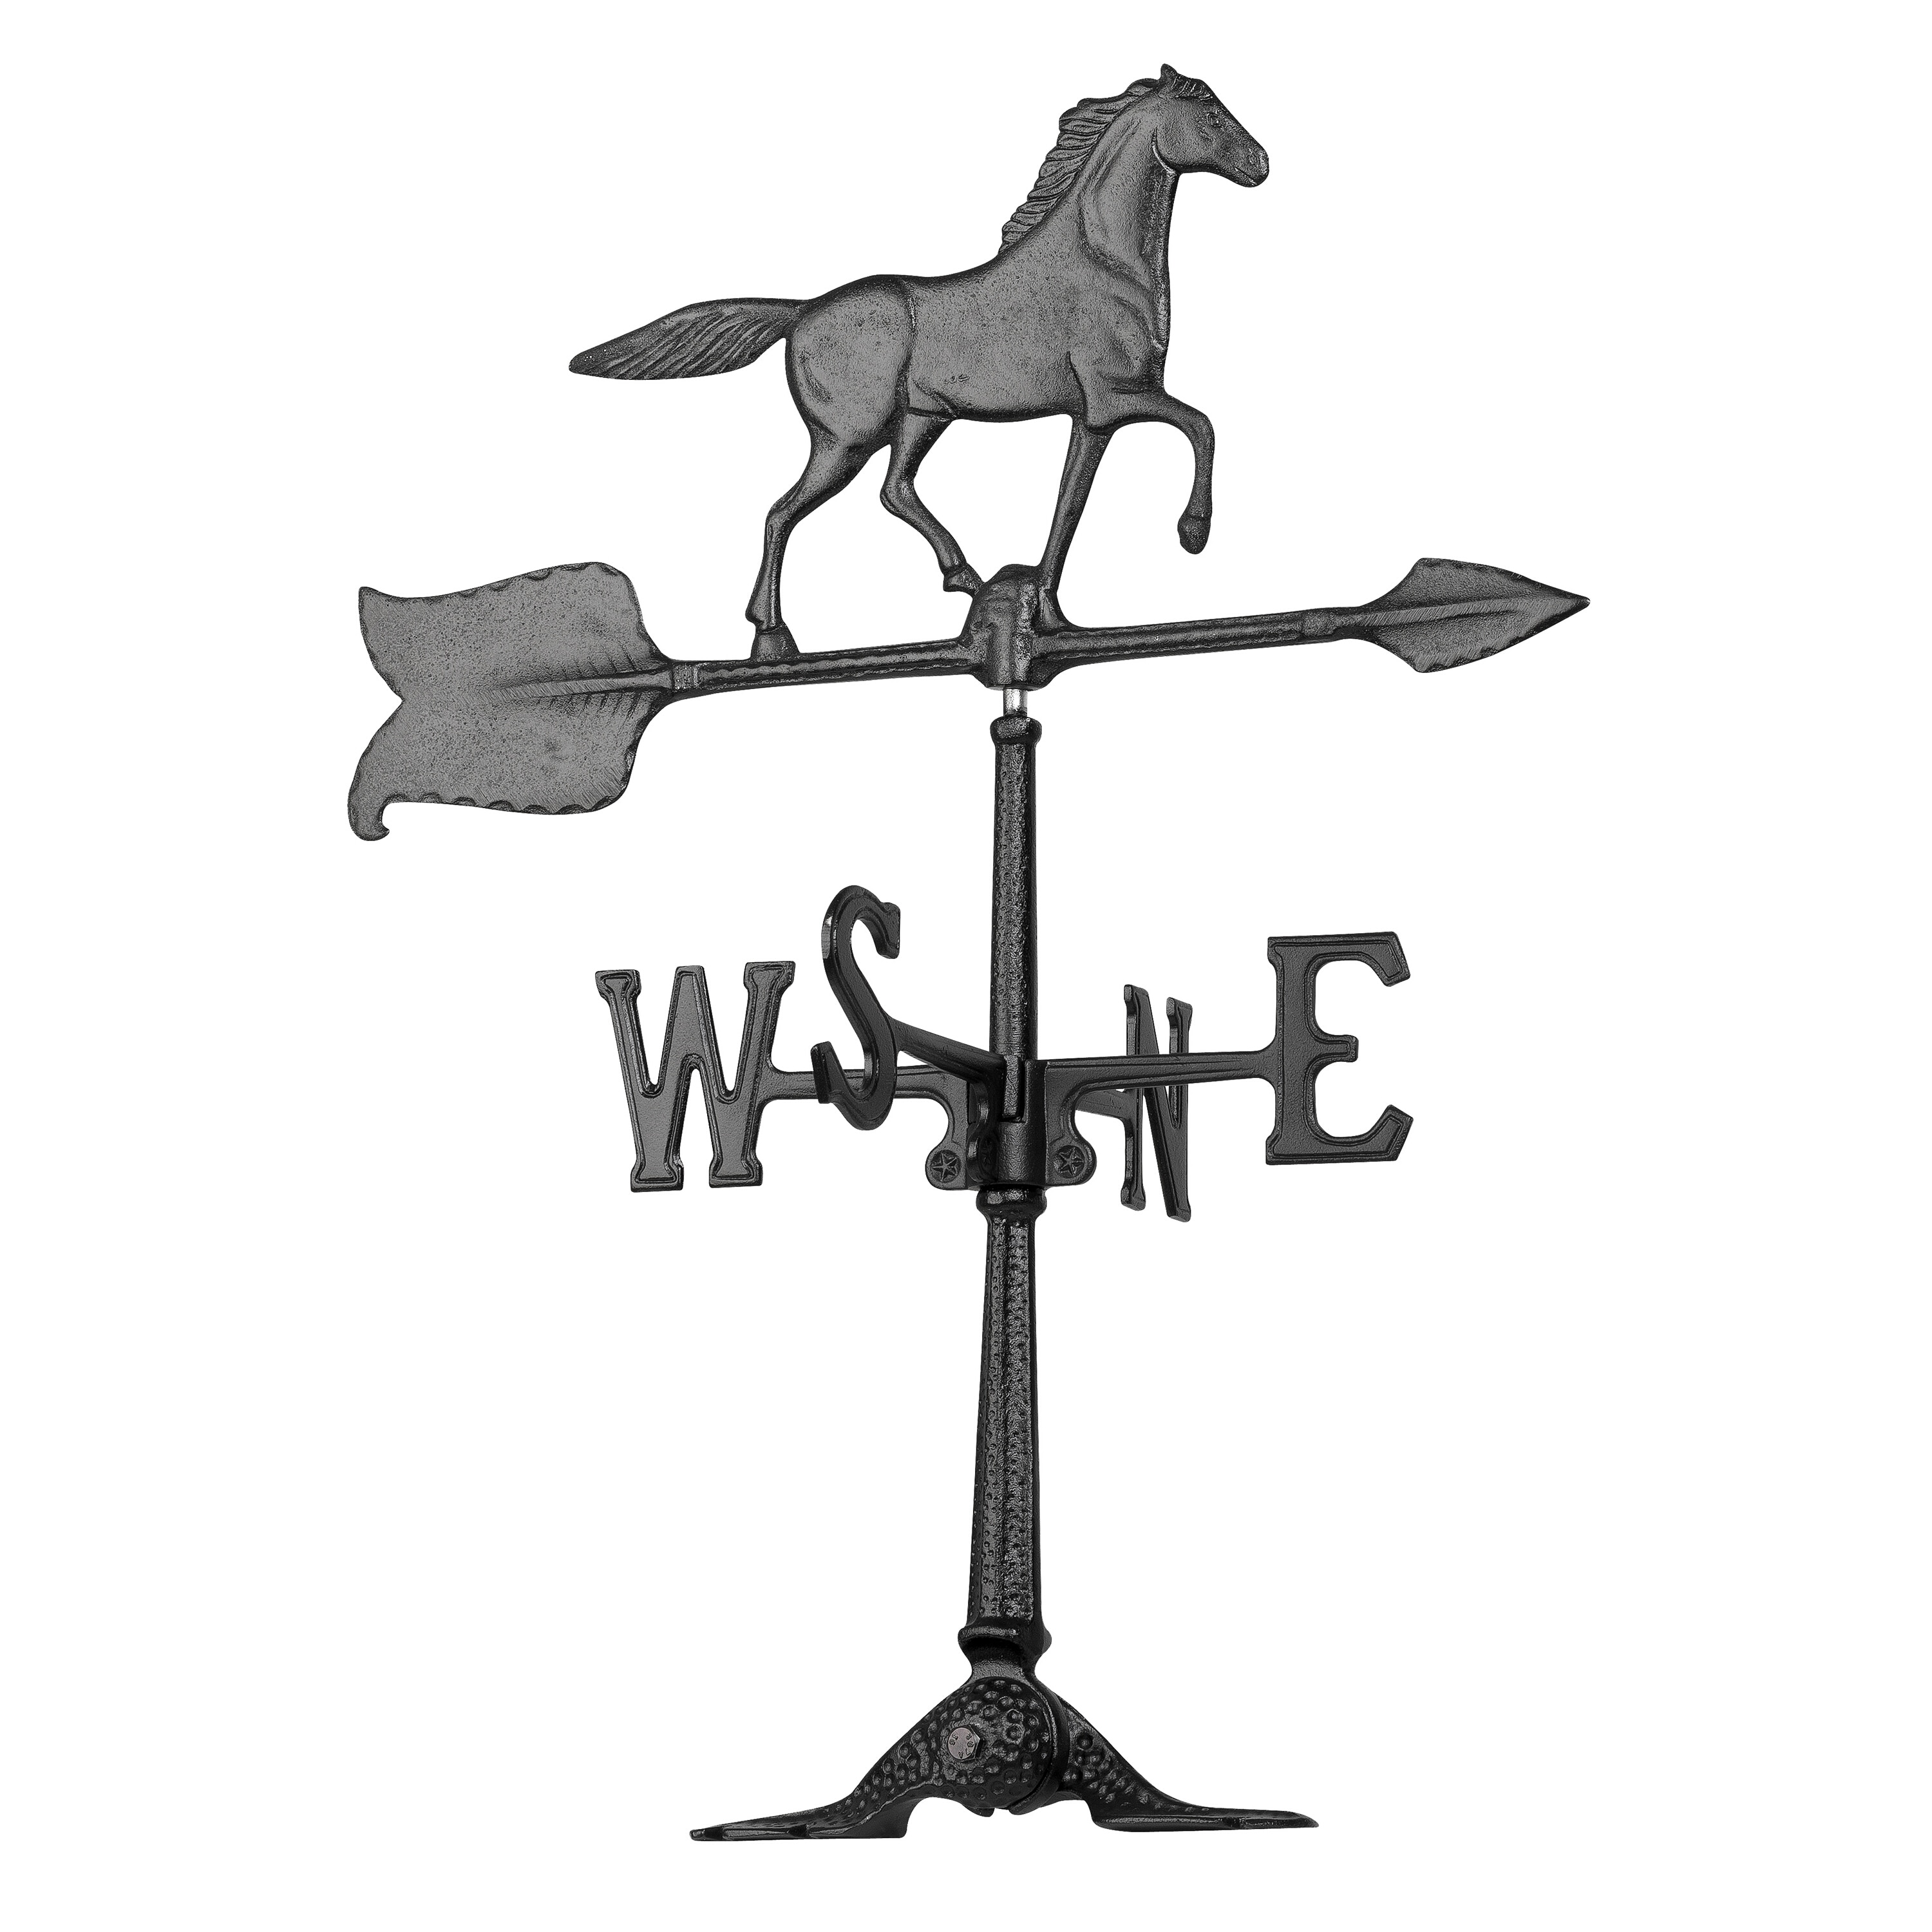 Weather-resistant Square Horse Sign 'Plz Close Gate' Adhesive Information Notice 